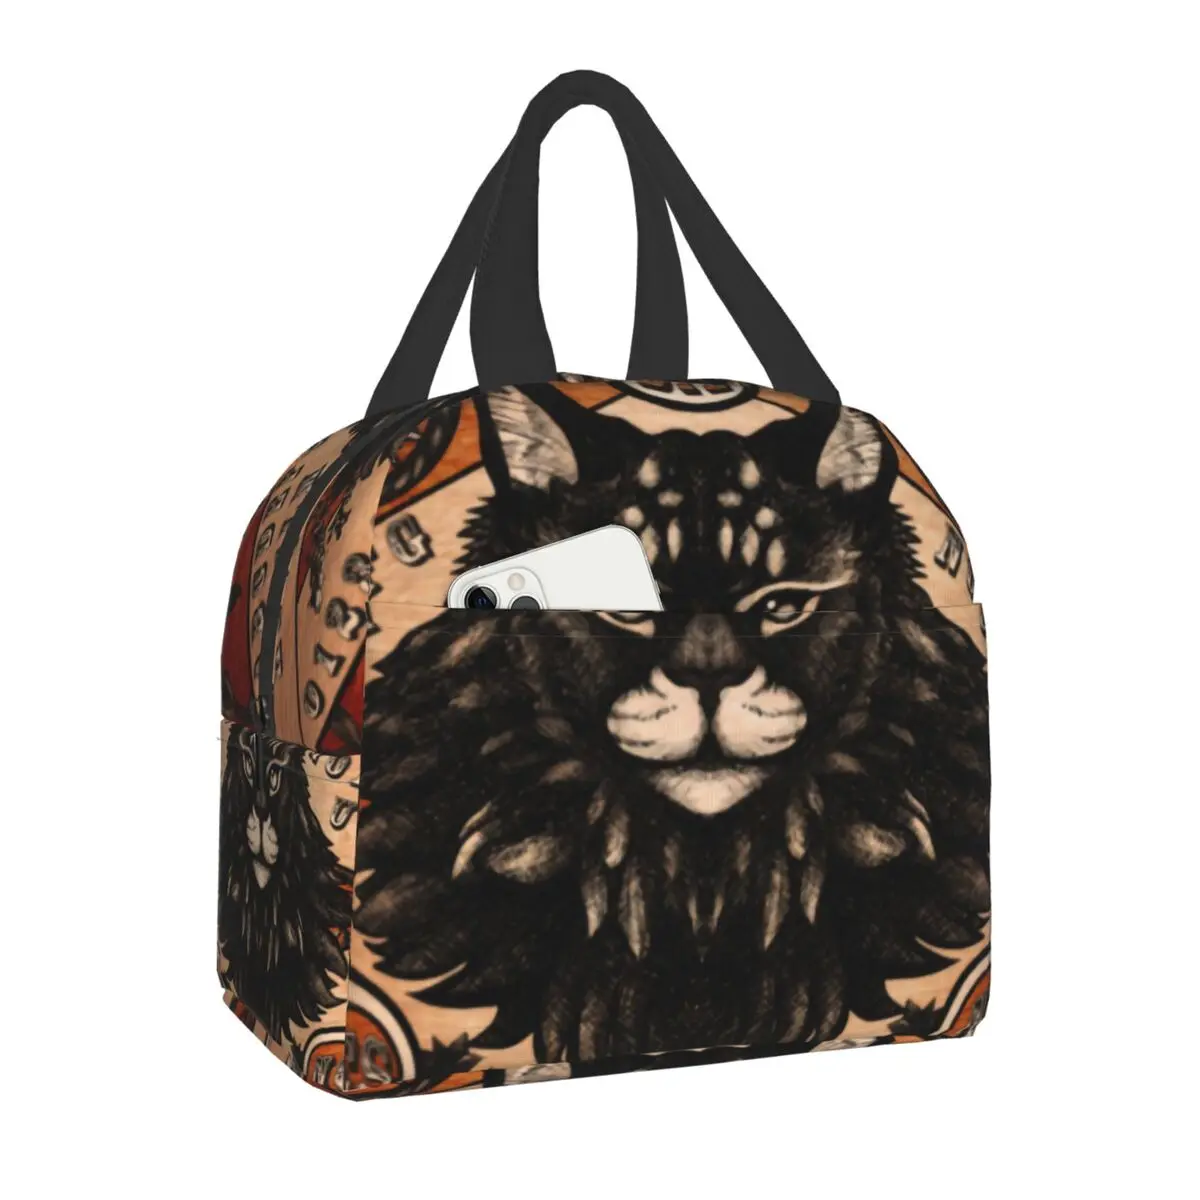 Ouija Board Witch Insulated Lunch Bags for Women Maine Coon Portable Thermal Cooler Bento Box Work School Travel